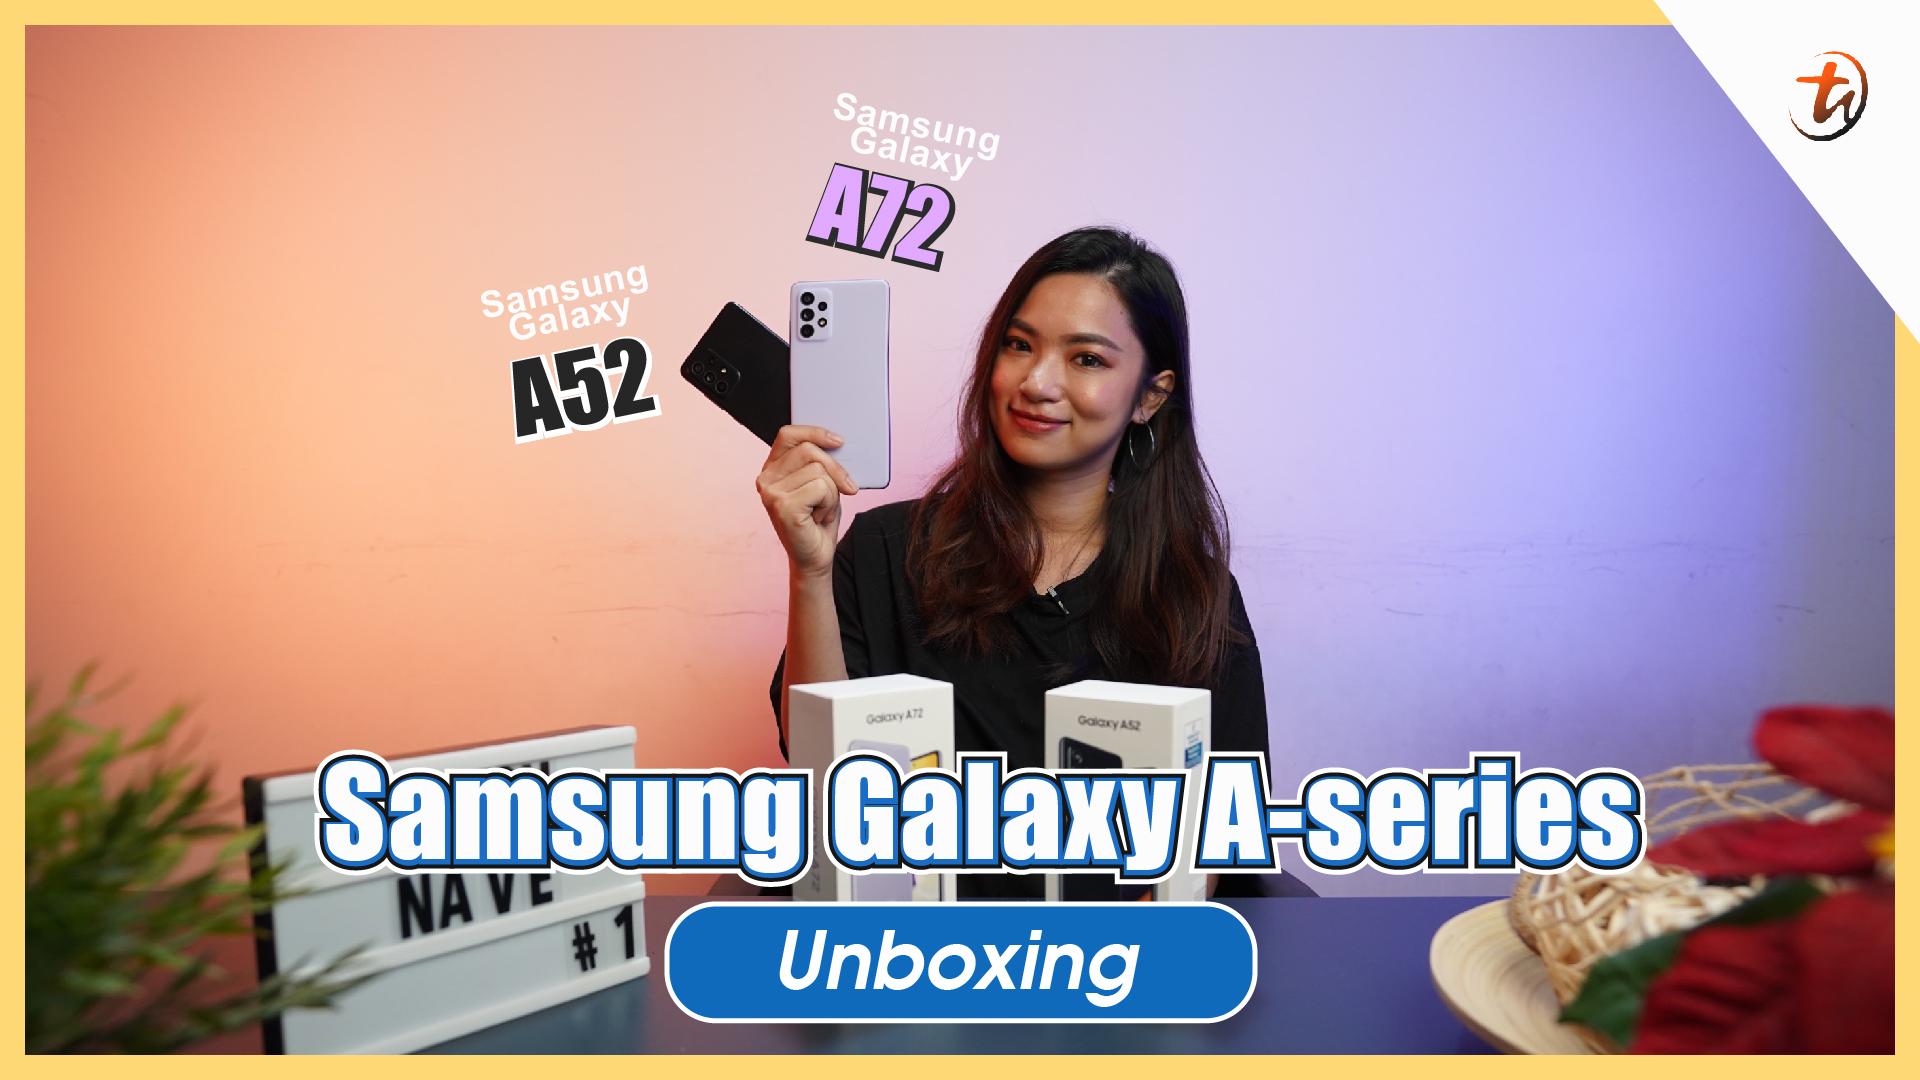 Samsung Galaxy A series 2021 lineup - A72 & A52 | TechNave Unboxing and Hands-On Video